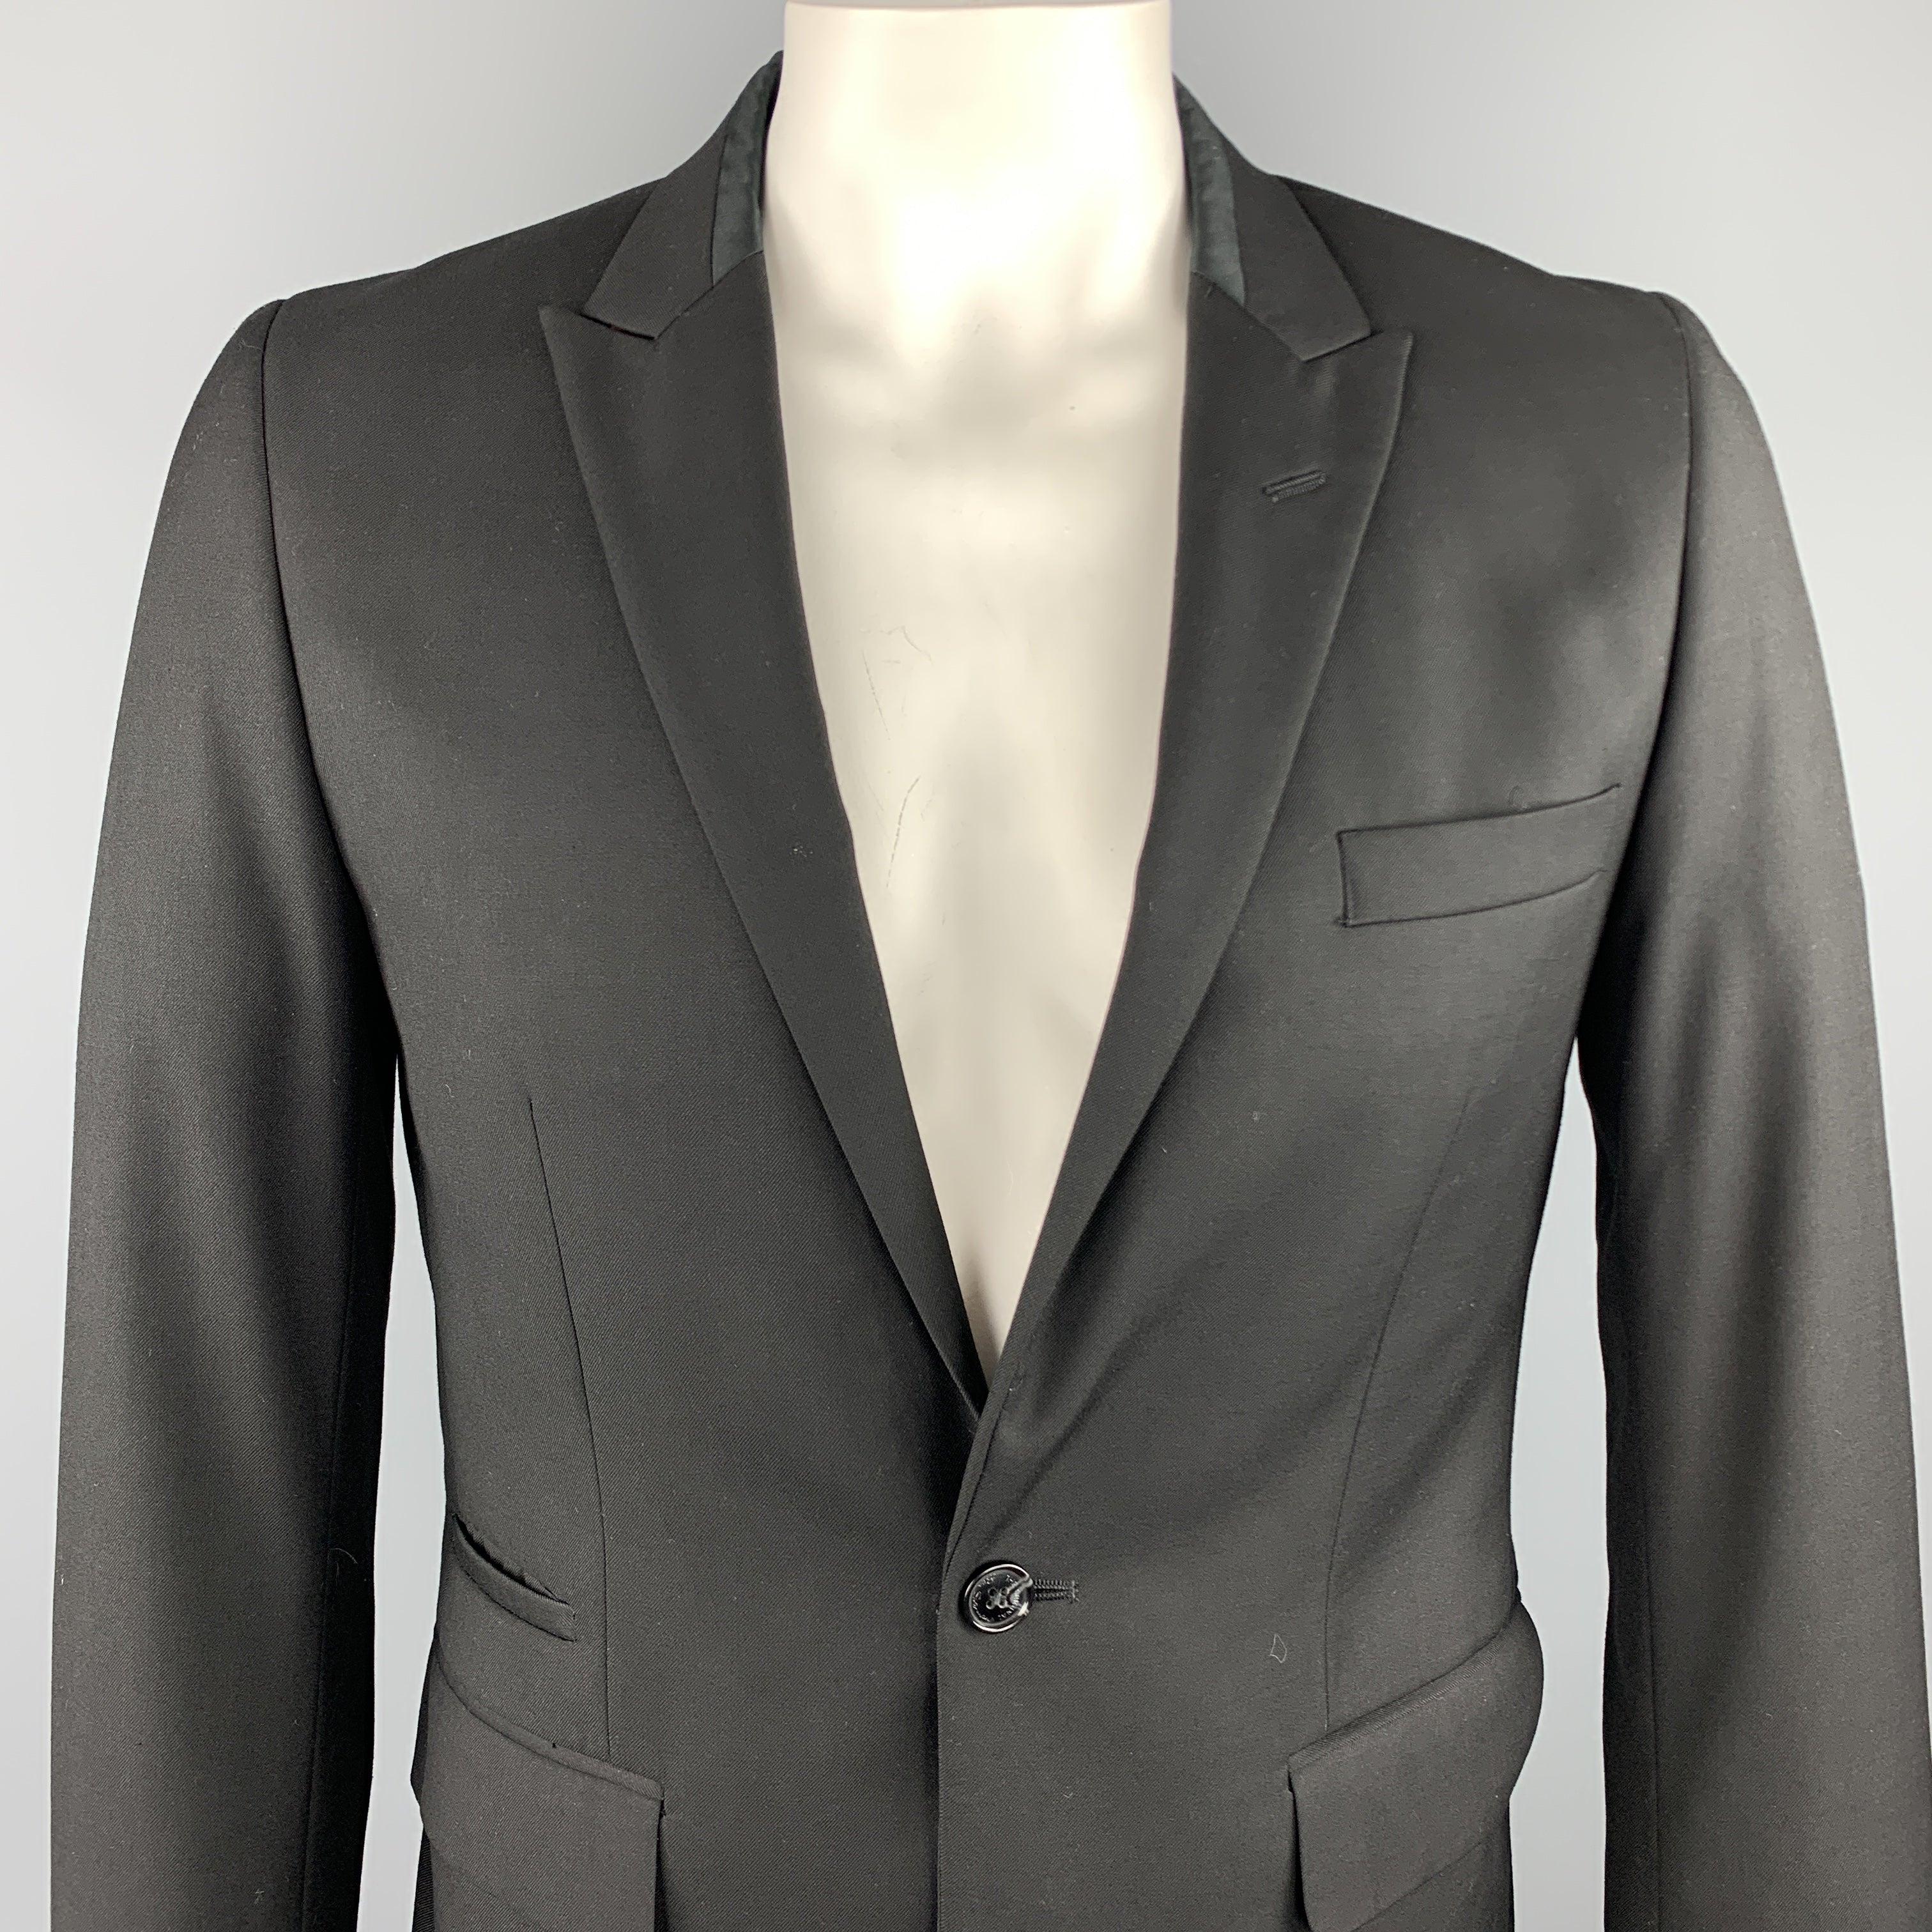 BEN SHERMAN sport coat comes in a black polyester featuring a peak lapel style, flap pockets, red silk liner, and a single button closure.
Excellent
Pre-Owned Condition. 

Marked:   US L
 

Measurements: 
 
Shoulder: 17 inches 
Chest: 41 inches